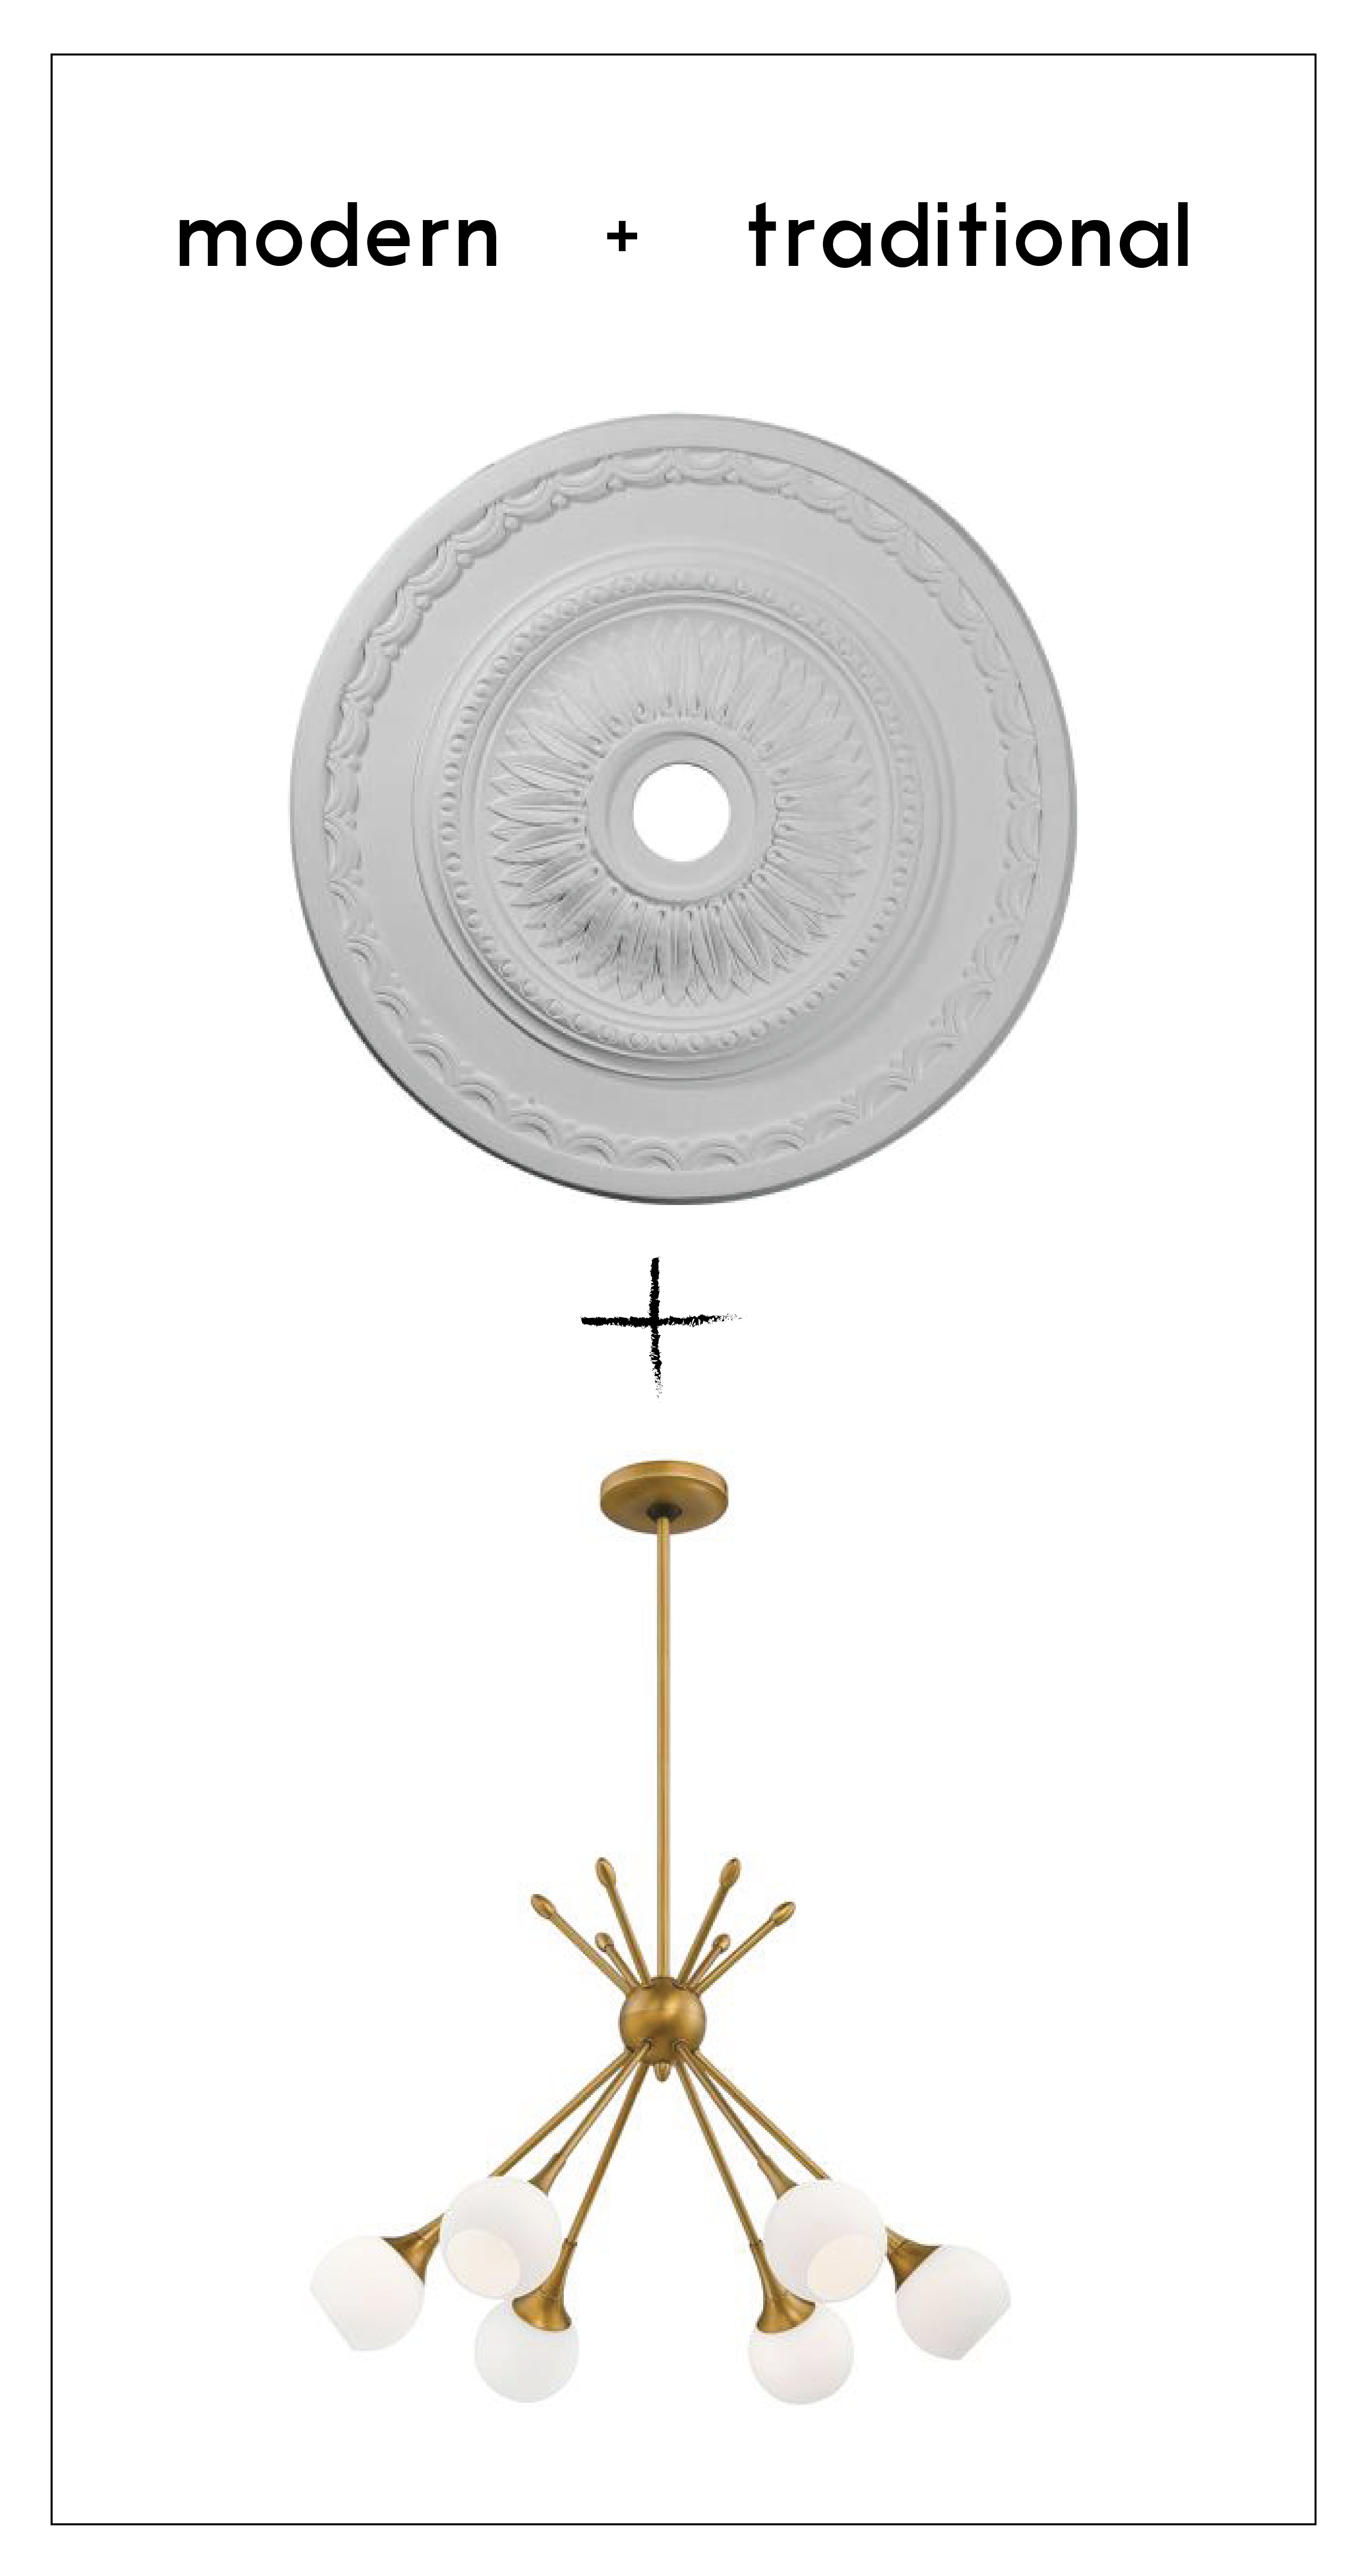 How To Center A Light Fixture Using A Ceiling Medallion